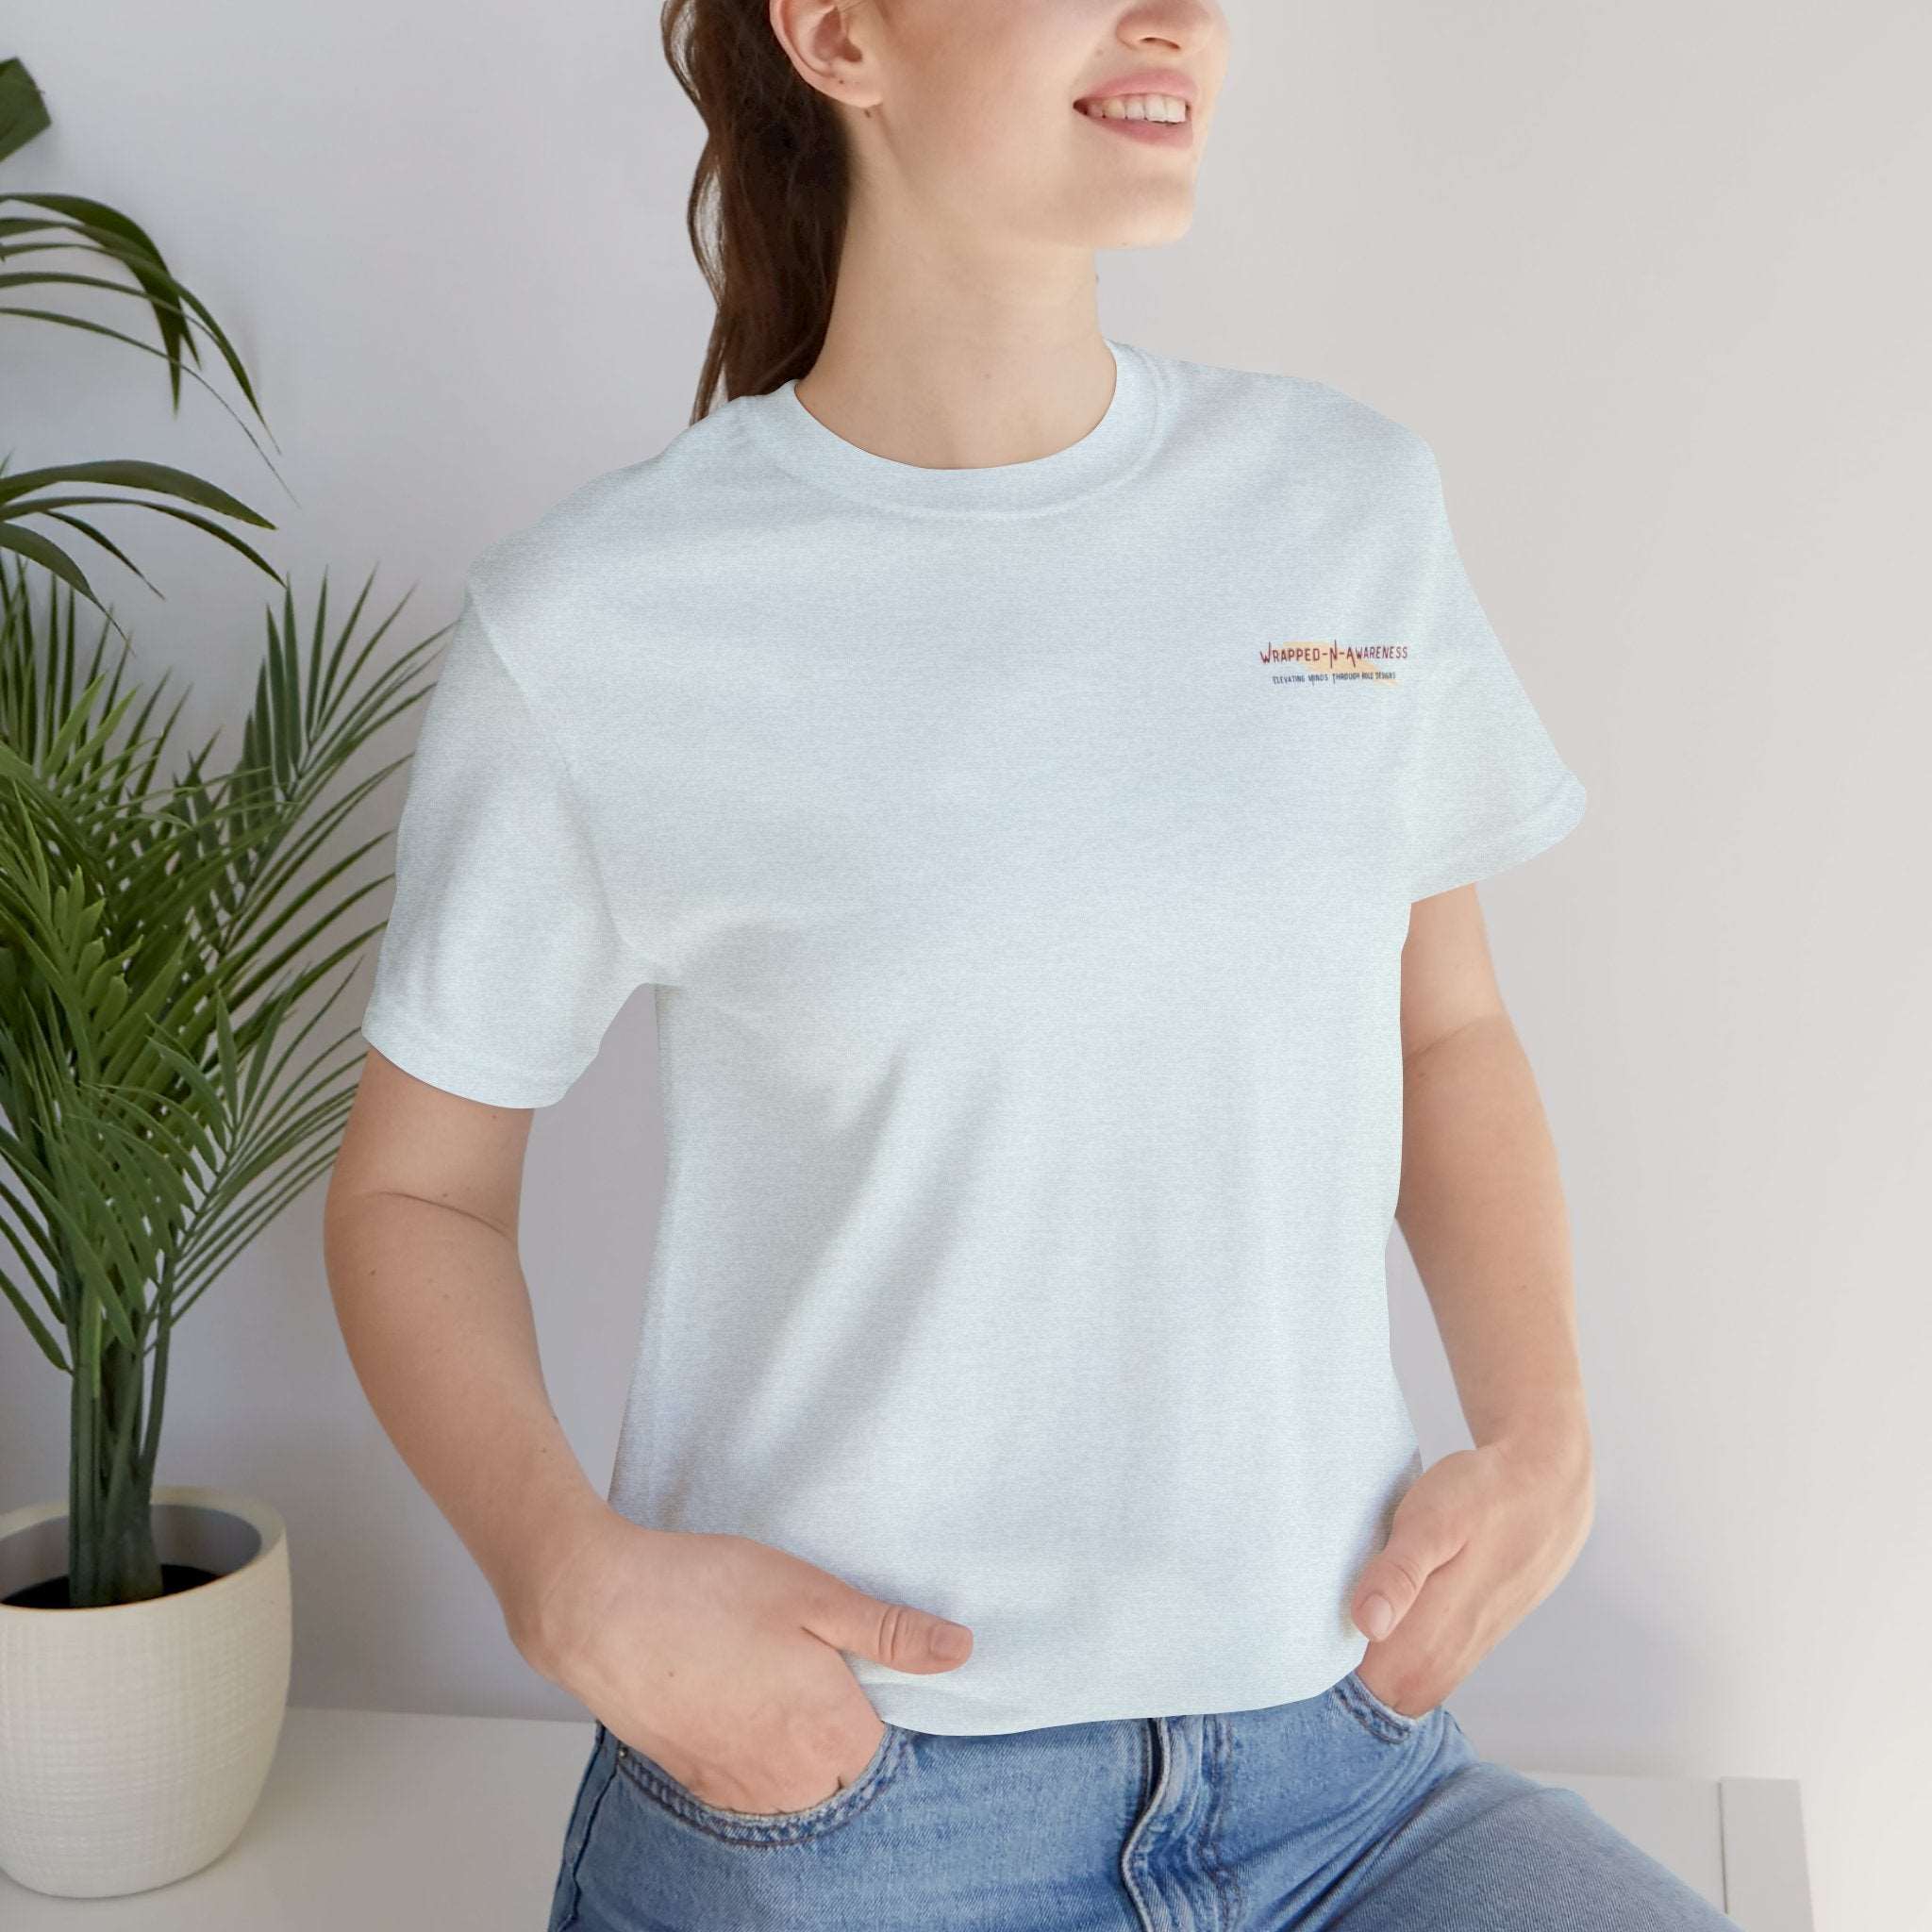 Find Your Balance Jersey Tee - Bella+Canvas 3001 Heather Ice Blue Airlume Cotton Bella+Canvas 3001 Crew Neckline Jersey Short Sleeve Lightweight Fabric Mental Health Support Retail Fit Tear-away Label Tee Unisex Tee T-Shirt 6212163183900812799_2048_7348d42c-b93b-4fe0-b522-11b7f01f9945 Printify